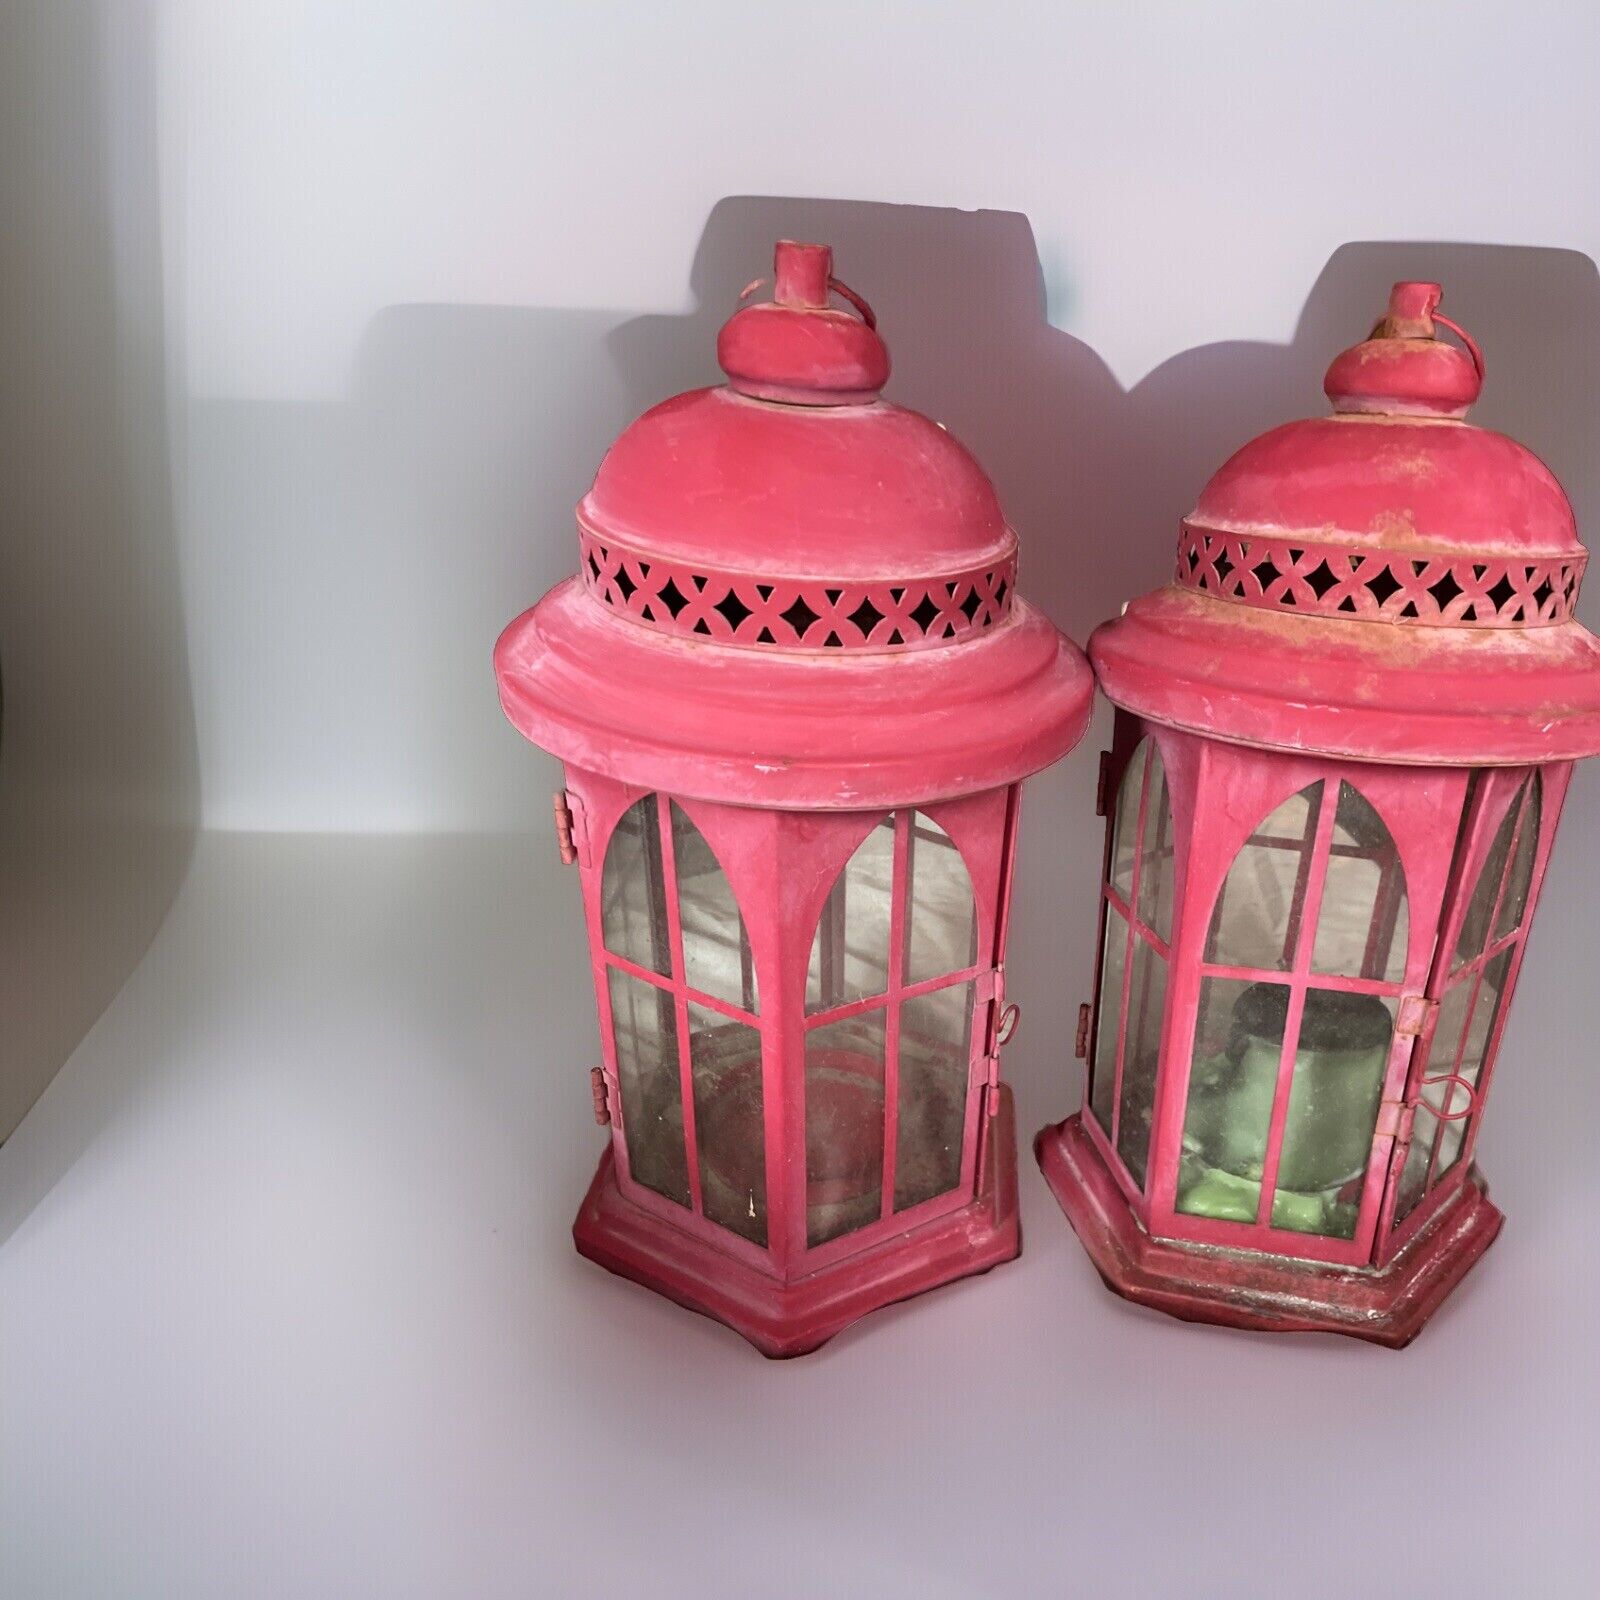 2 vintage red lanterns  One Has A Vintage Candle